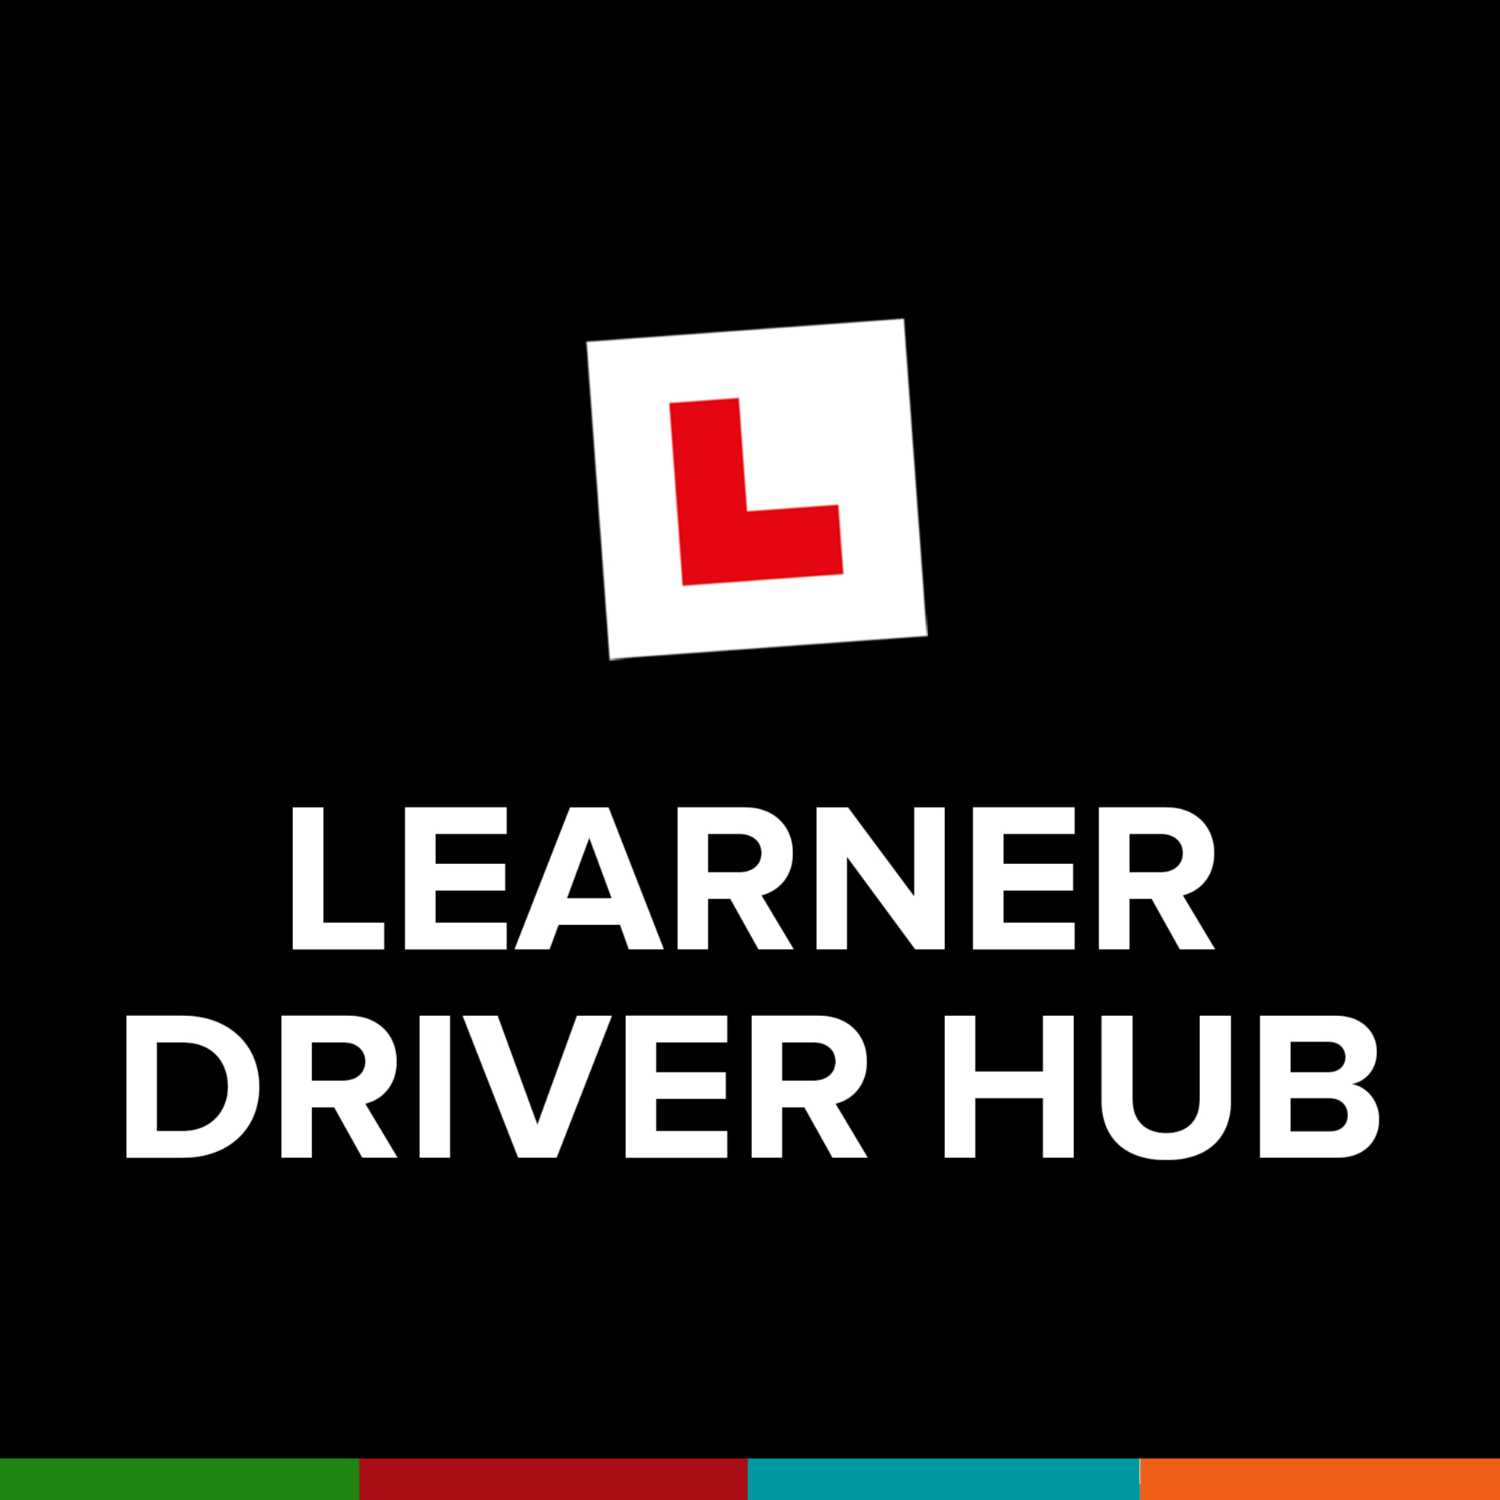 Learning to drive: Getting Started